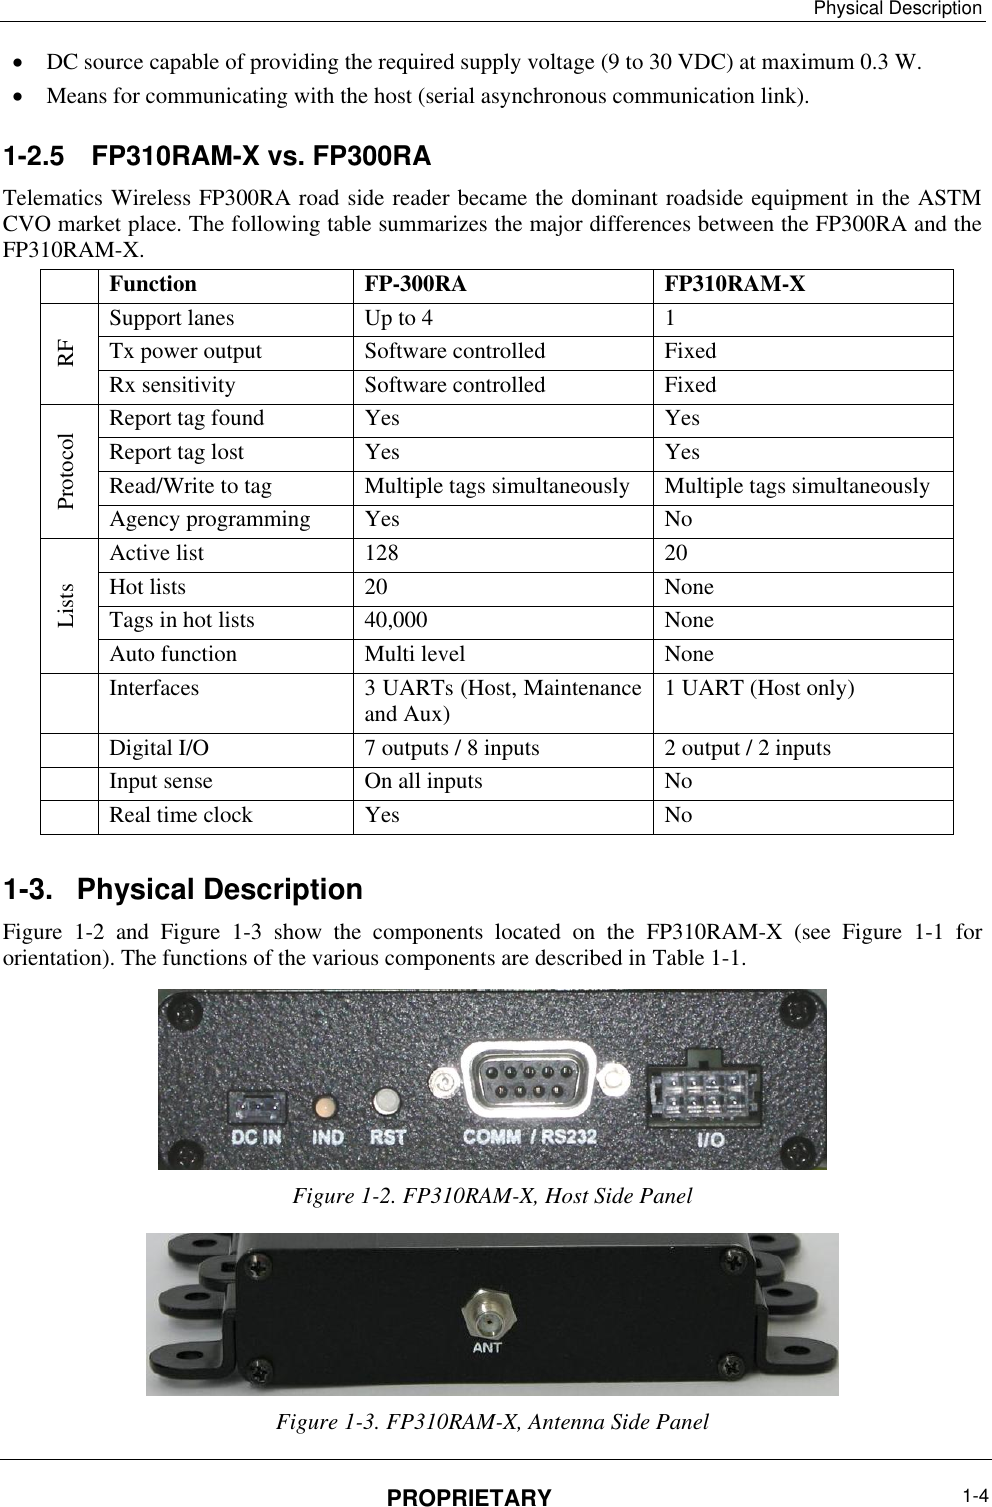 Physical Description PROPRIETARY  1-4   DC source capable of providing the required supply voltage (9 to 30 VDC) at maximum 0.3 W.  Means for communicating with the host (serial asynchronous communication link). 1-2.5  FP310RAM-X vs. FP300RA Telematics Wireless FP300RA road side reader became the dominant roadside equipment in the ASTM CVO market place. The following table summarizes the major differences between the FP300RA and the FP310RAM-X.  Function FP-300RA FP310RAM-X RF Support lanes Up to 4 1 Tx power output Software controlled Fixed Rx sensitivity Software controlled Fixed Protocol Report tag found Yes Yes Report tag lost Yes Yes Read/Write to tag Multiple tags simultaneously Multiple tags simultaneously Agency programming Yes No Lists Active list 128 20 Hot lists 20 None Tags in hot lists 40,000 None Auto function Multi level None  Interfaces 3 UARTs (Host, Maintenance and Aux) 1 UART (Host only)  Digital I/O 7 outputs / 8 inputs 2 output / 2 inputs  Input sense On all inputs No  Real time clock Yes No 1-3.  Physical Description Figure  ‎1-2  and  Figure  ‎1-3  show  the  components  located  on  the  FP310RAM-X  (see  Figure  ‎1-1  for orientation). The functions of the various components are described in Table ‎1-1.  Figure ‎1-2. FP310RAM-X, Host Side Panel  Figure ‎1-3. FP310RAM-X, Antenna Side Panel 